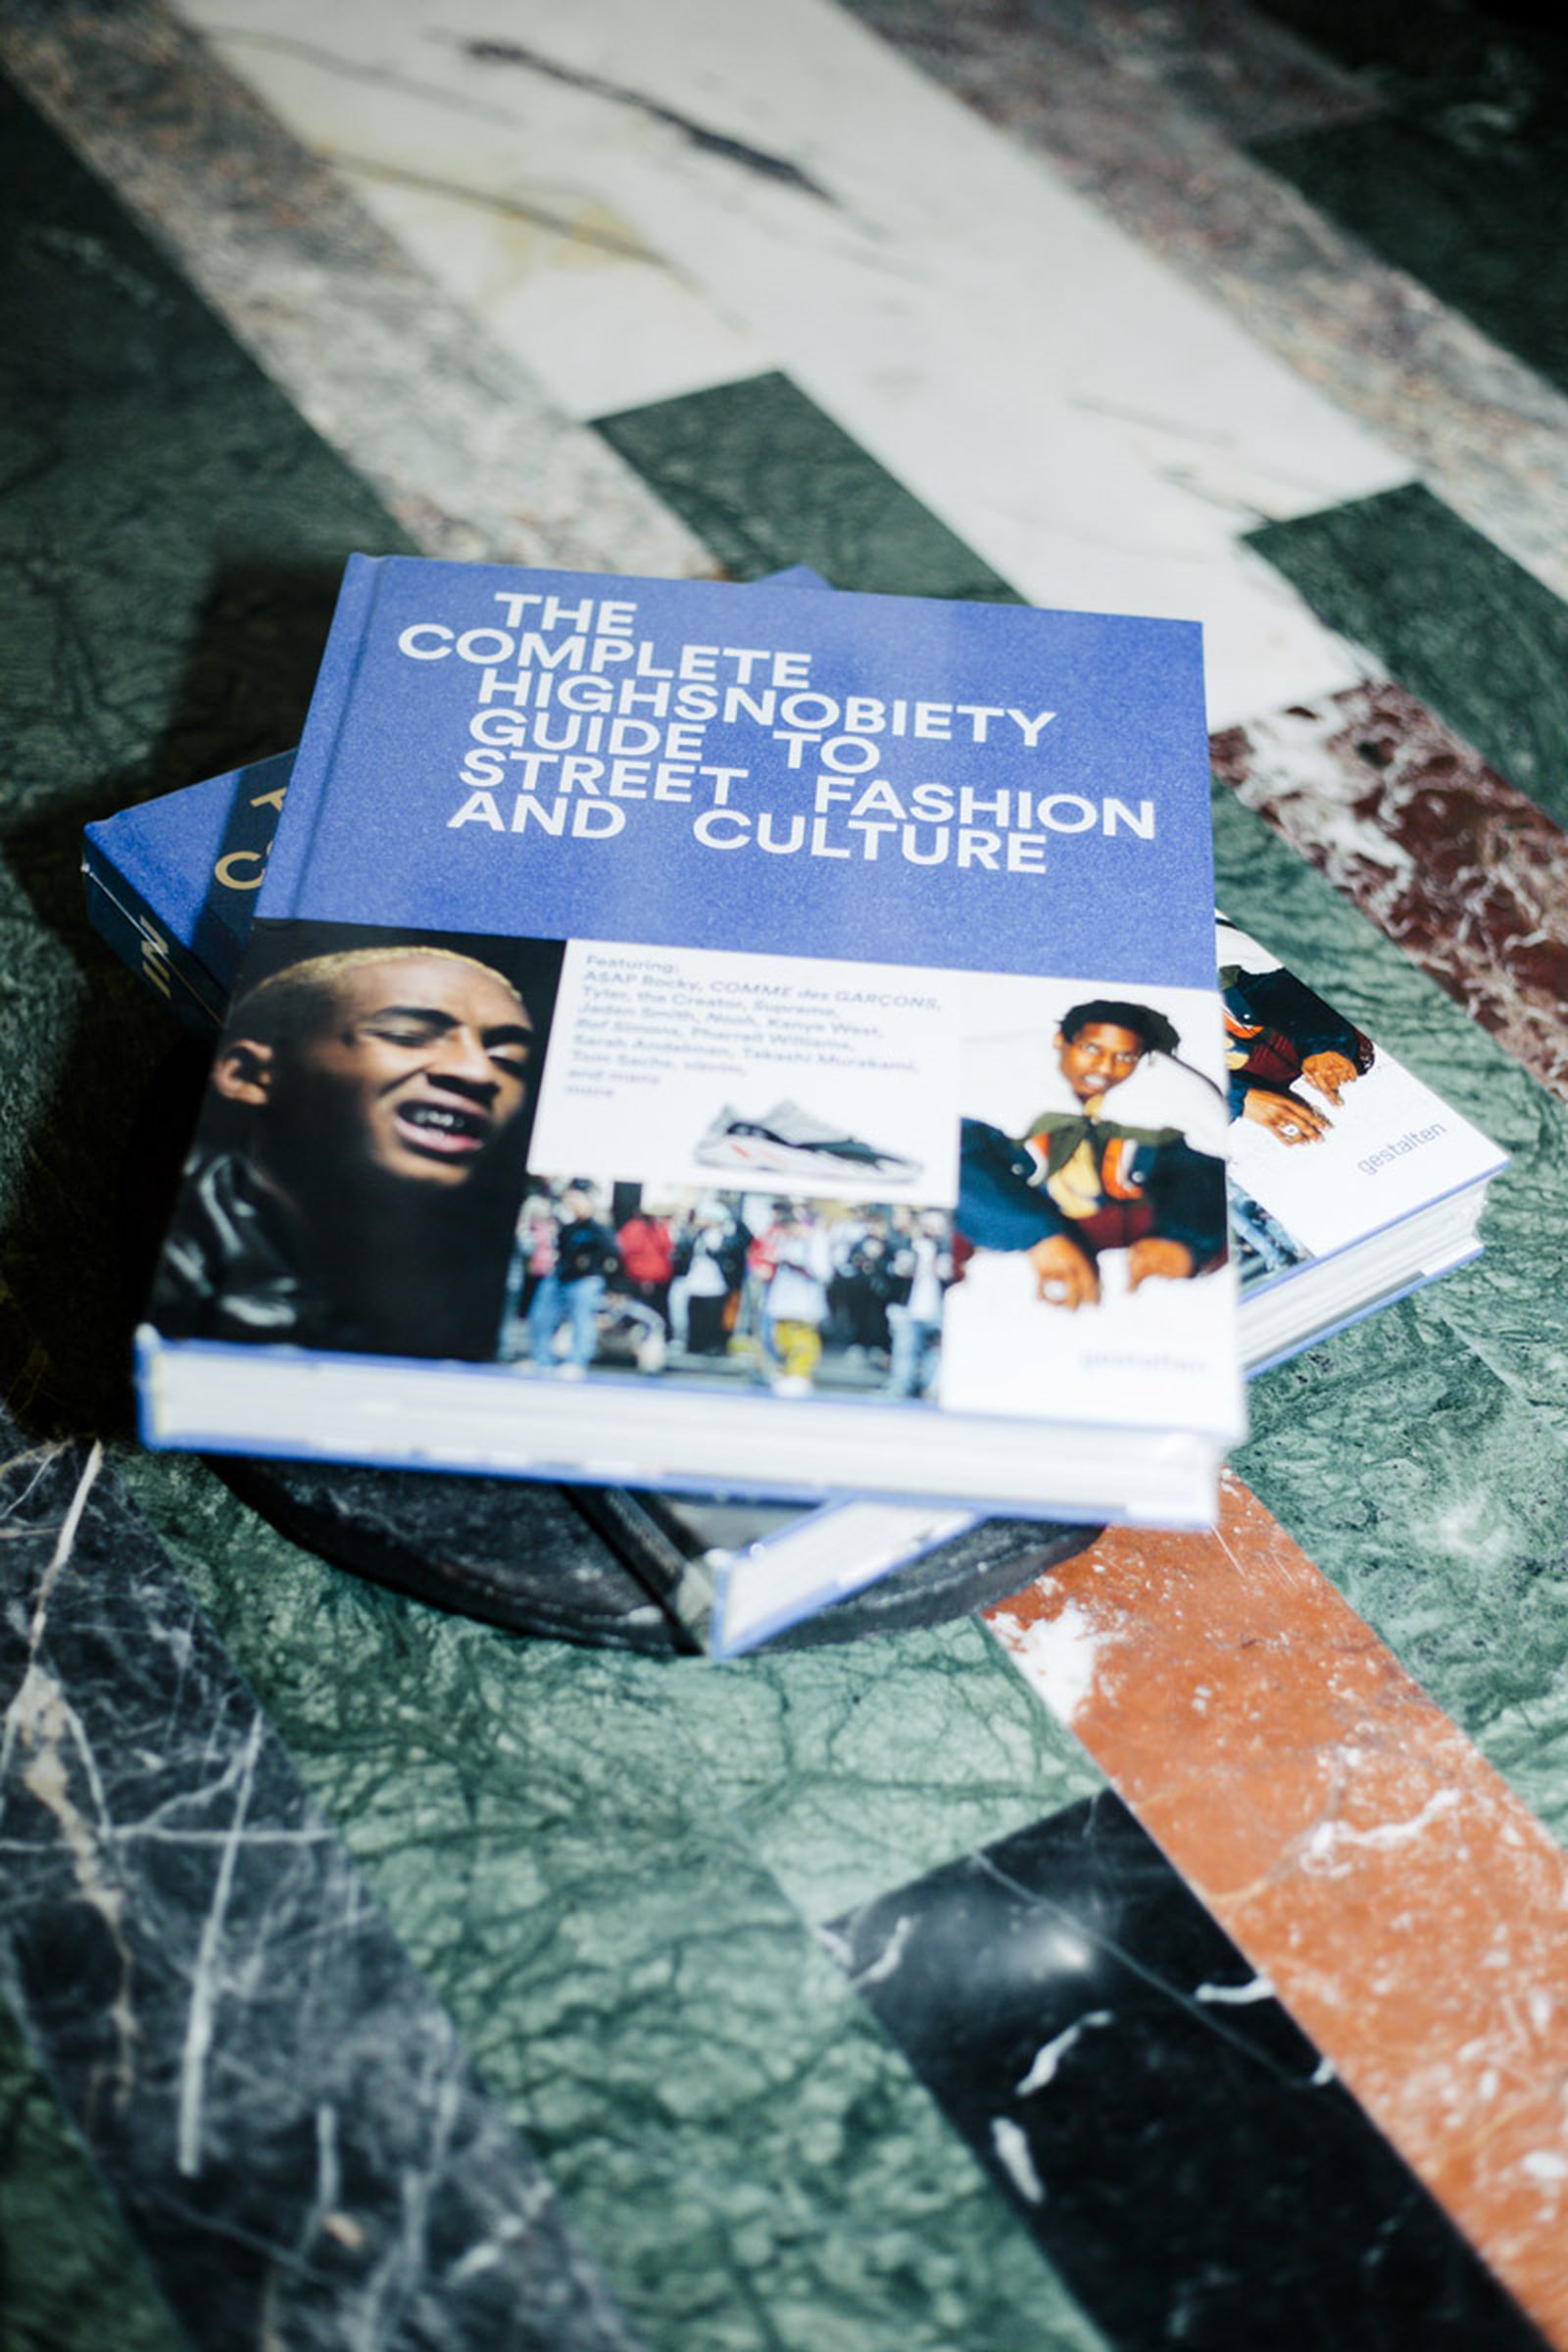 runway meets street according highsnobiety The Incomplete Highsnobiety Guide to Street Fashion and Culture street wear